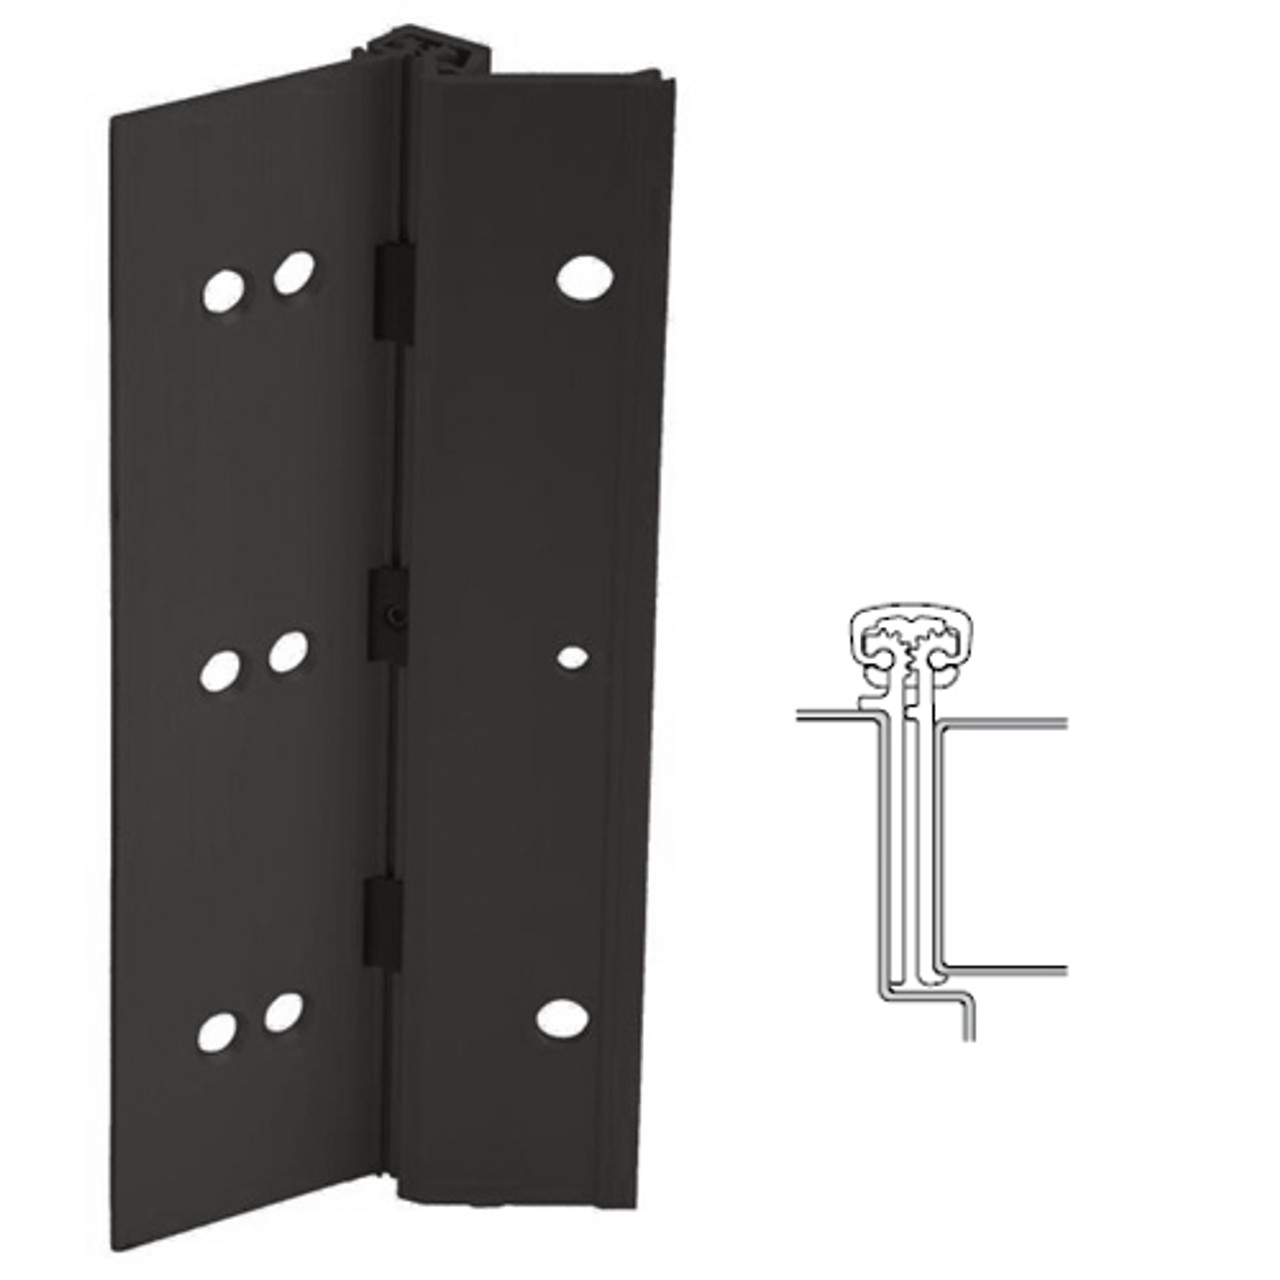 224XY-315AN-95-SECWDWD IVES Adjustable Full Surface Continuous Geared Hinges with Security Screws - Hex Pin Drive in Anodized Black